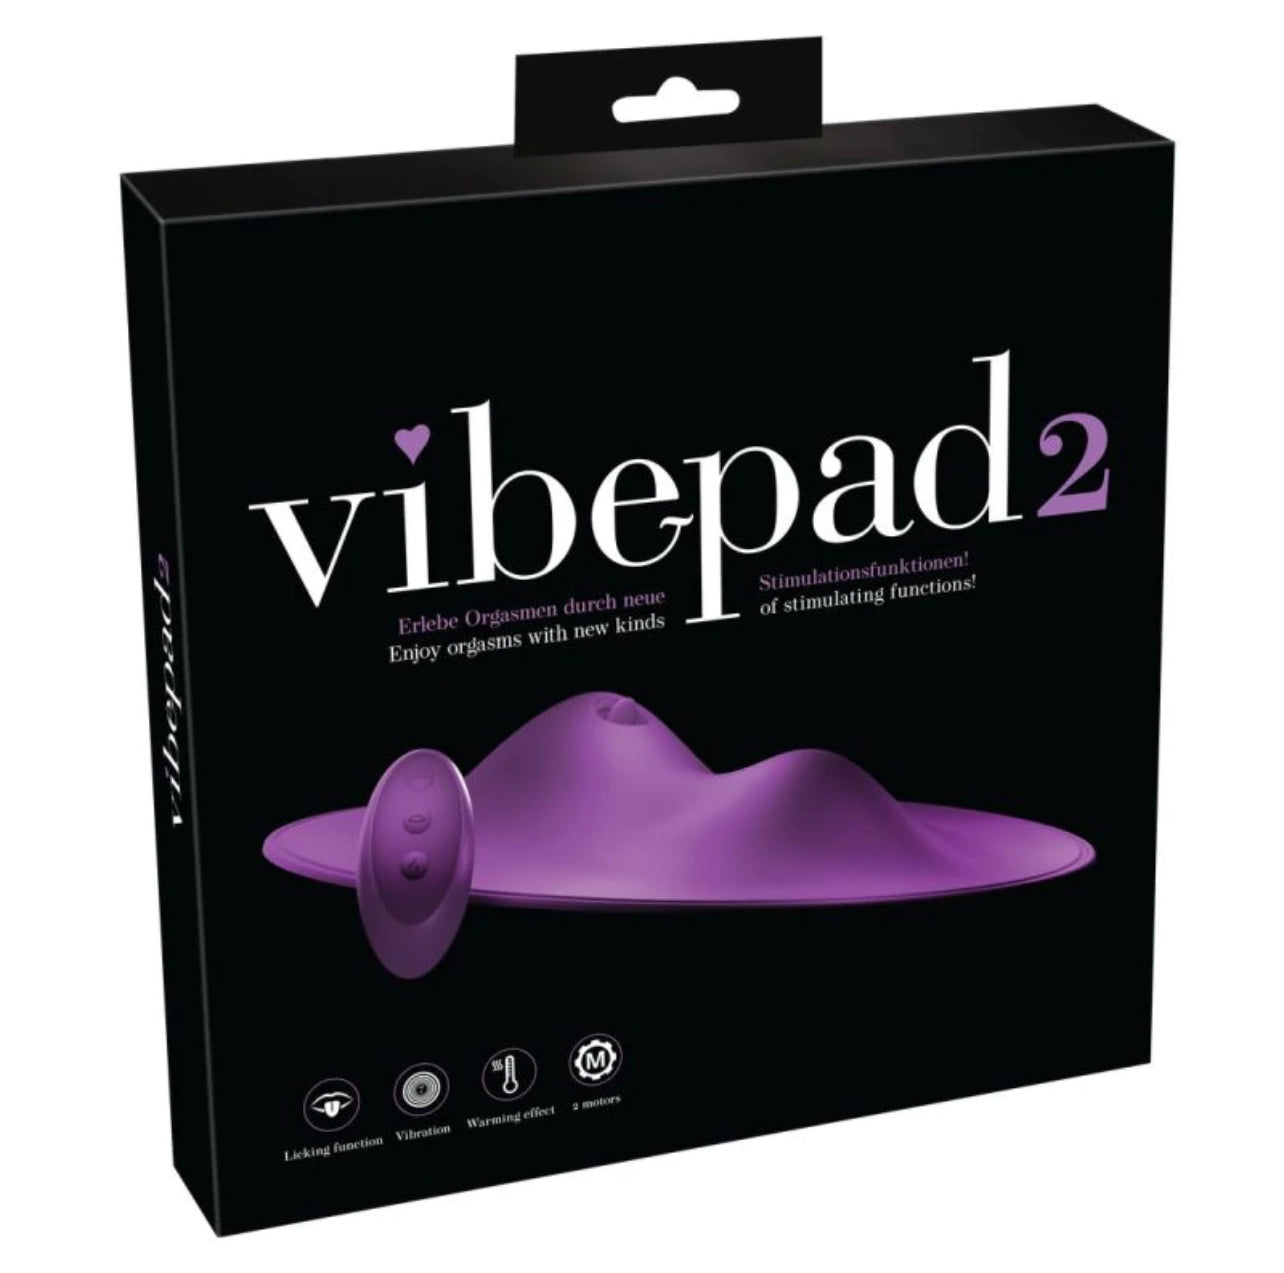 Orion Pleasure Waves Vibe Pad 2 - Remote Controlled